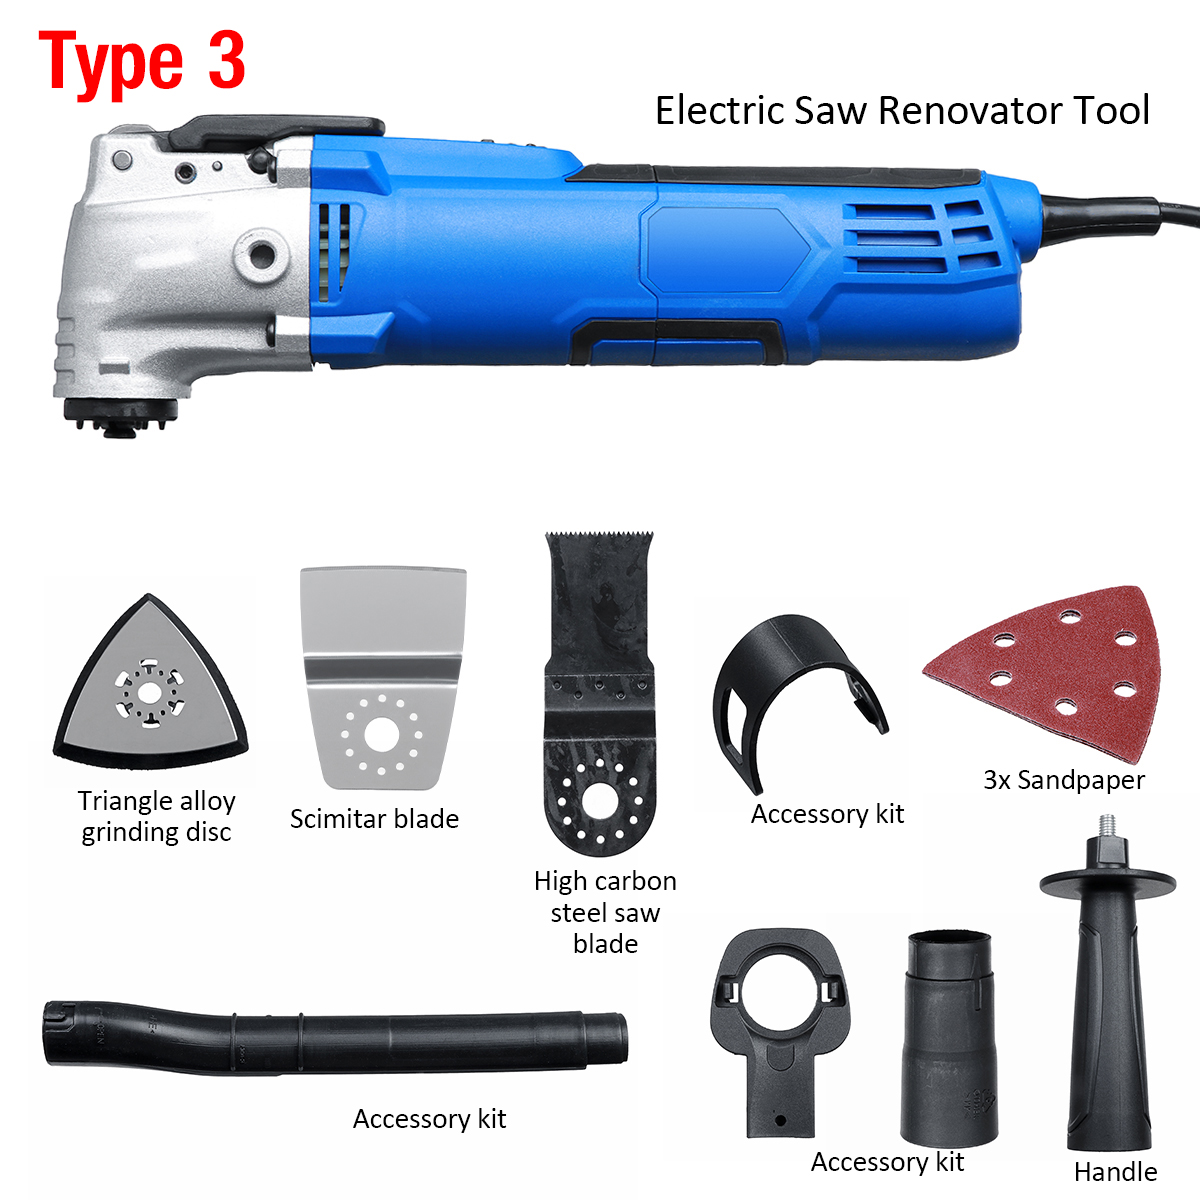 220V-Electric-Polisher-Cutter-Trimmer-Electric-Saw-Renovator-Tool-Woodworking-Oscillating-Tool-1800975-15